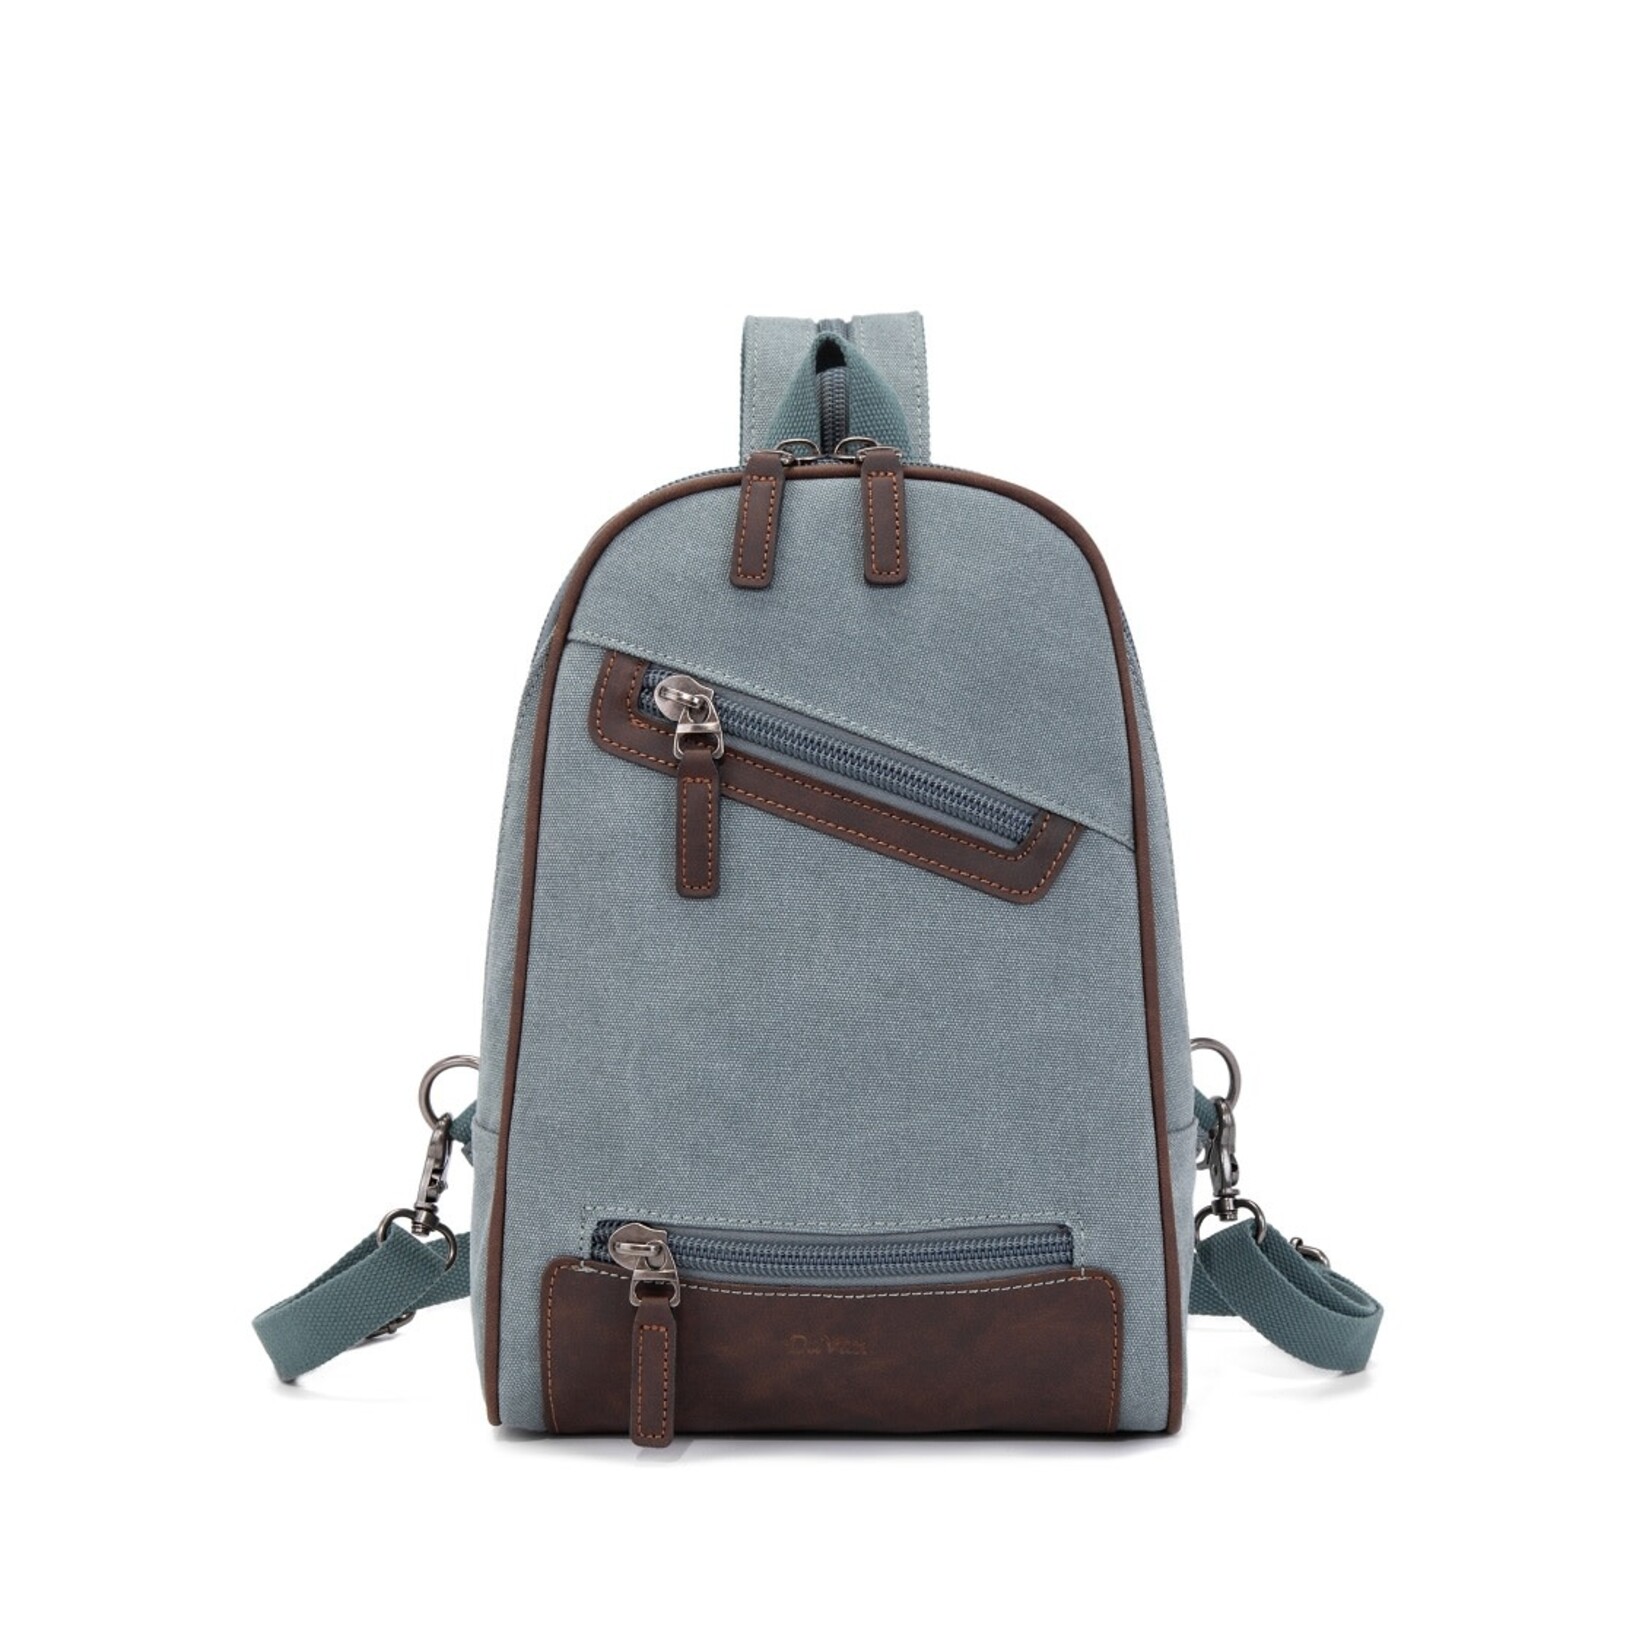 Multifunctional Canvas Backpack Sling Bag - Turquoise